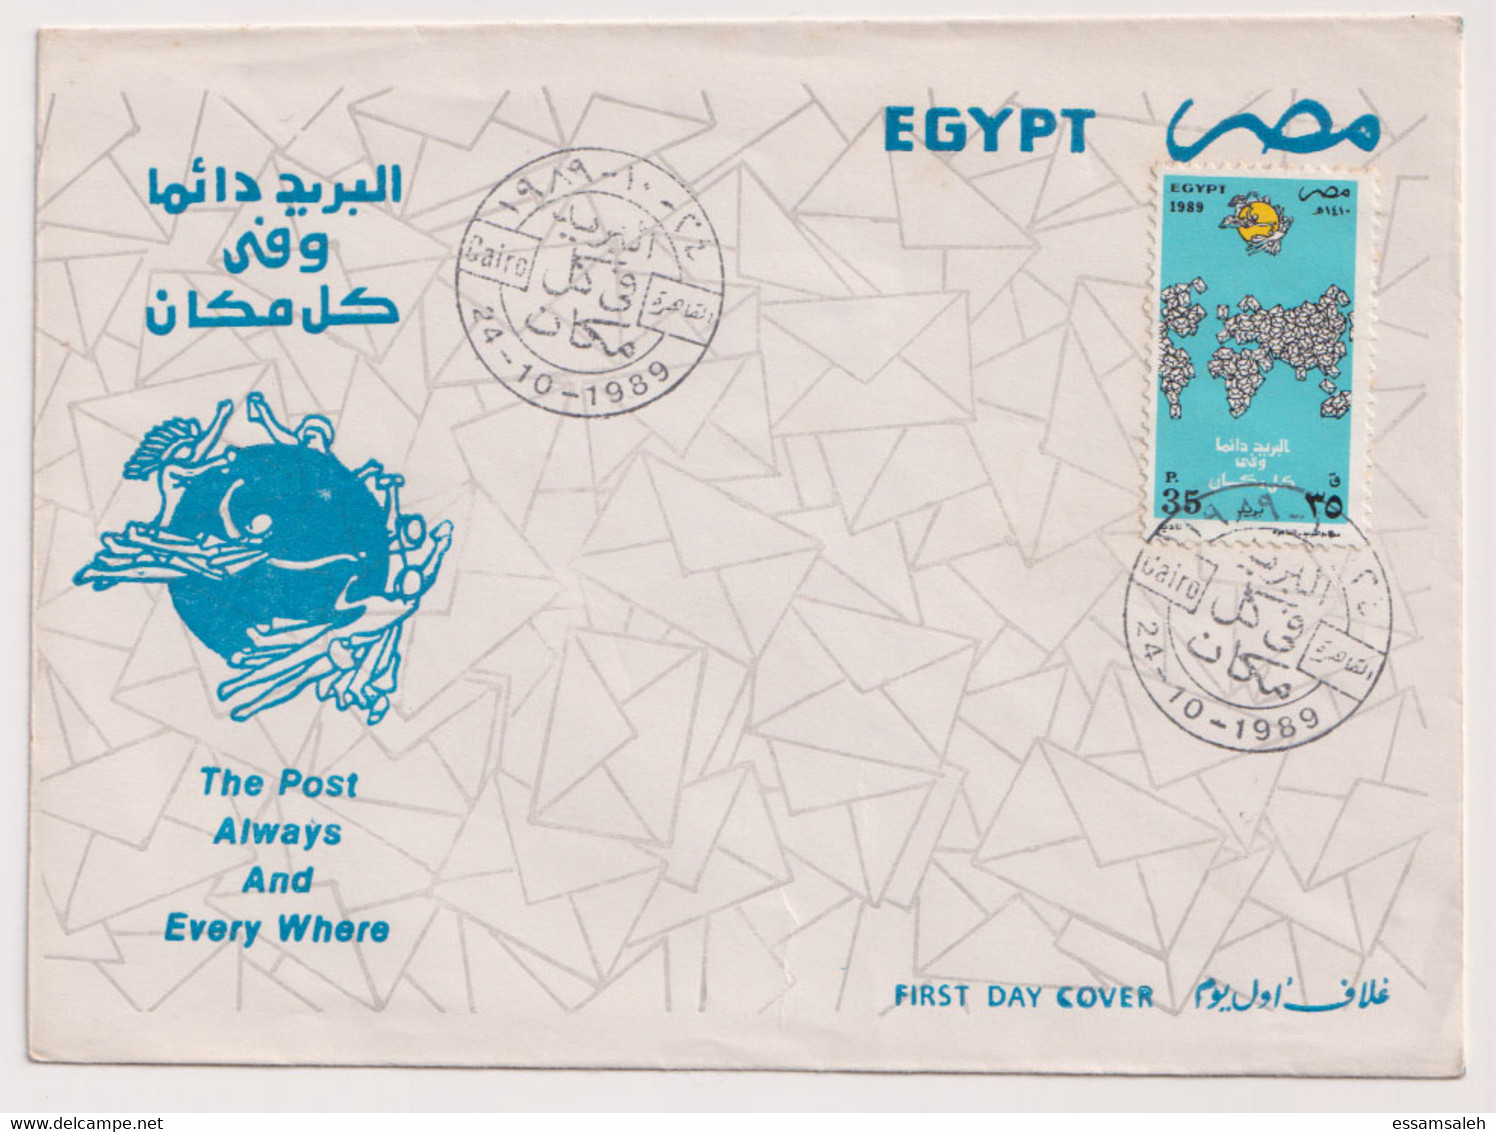 EGS30564 Egypt 1989 Illustrated FDC The Post Always And Every Where - UPU - Covers & Documents